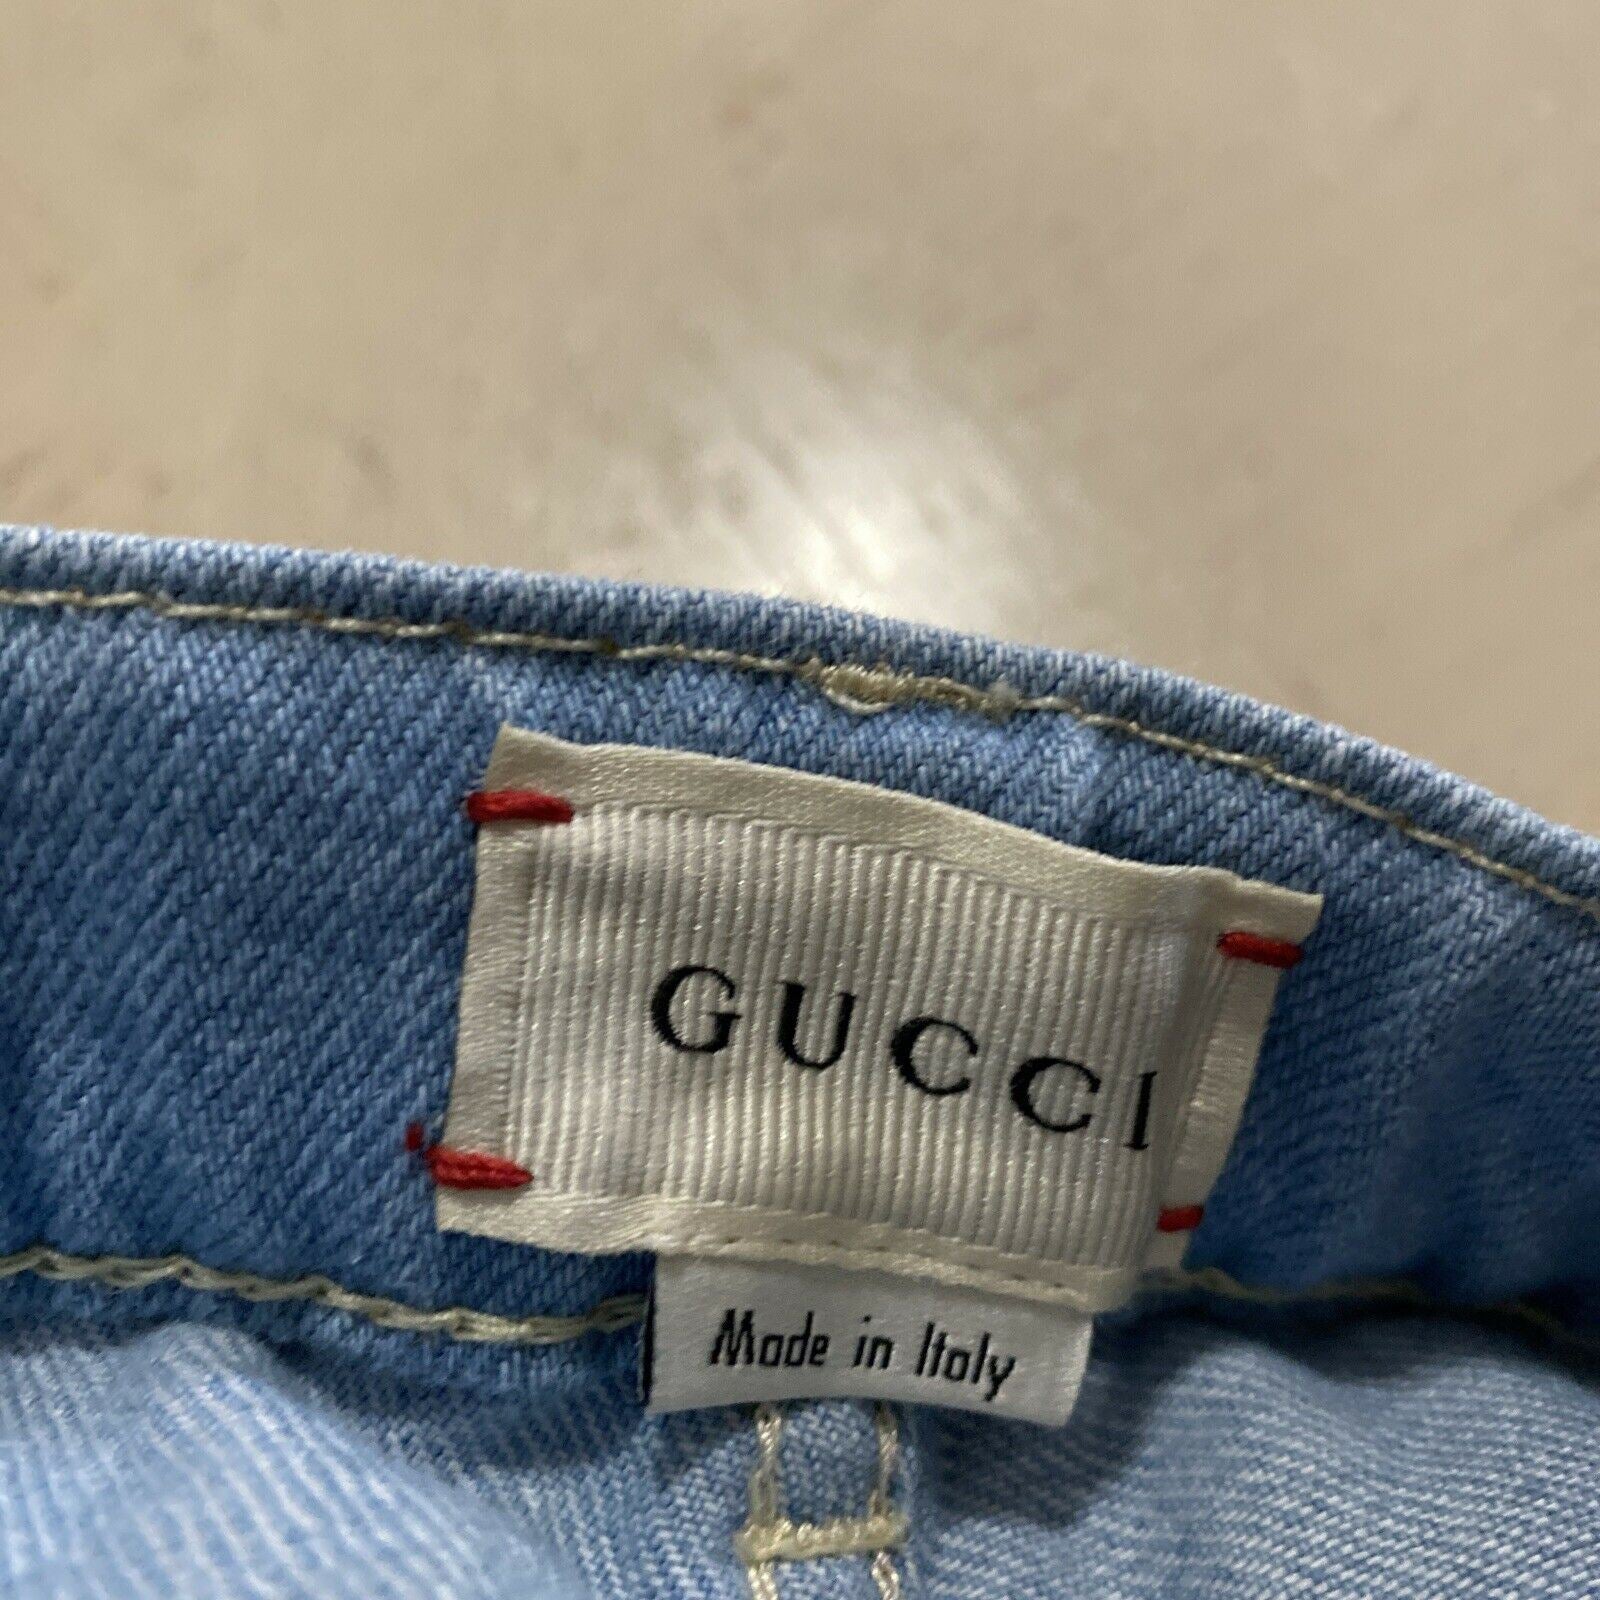 NWT Gucci Boys Jeans Pants LT Blue Size 5 Italy